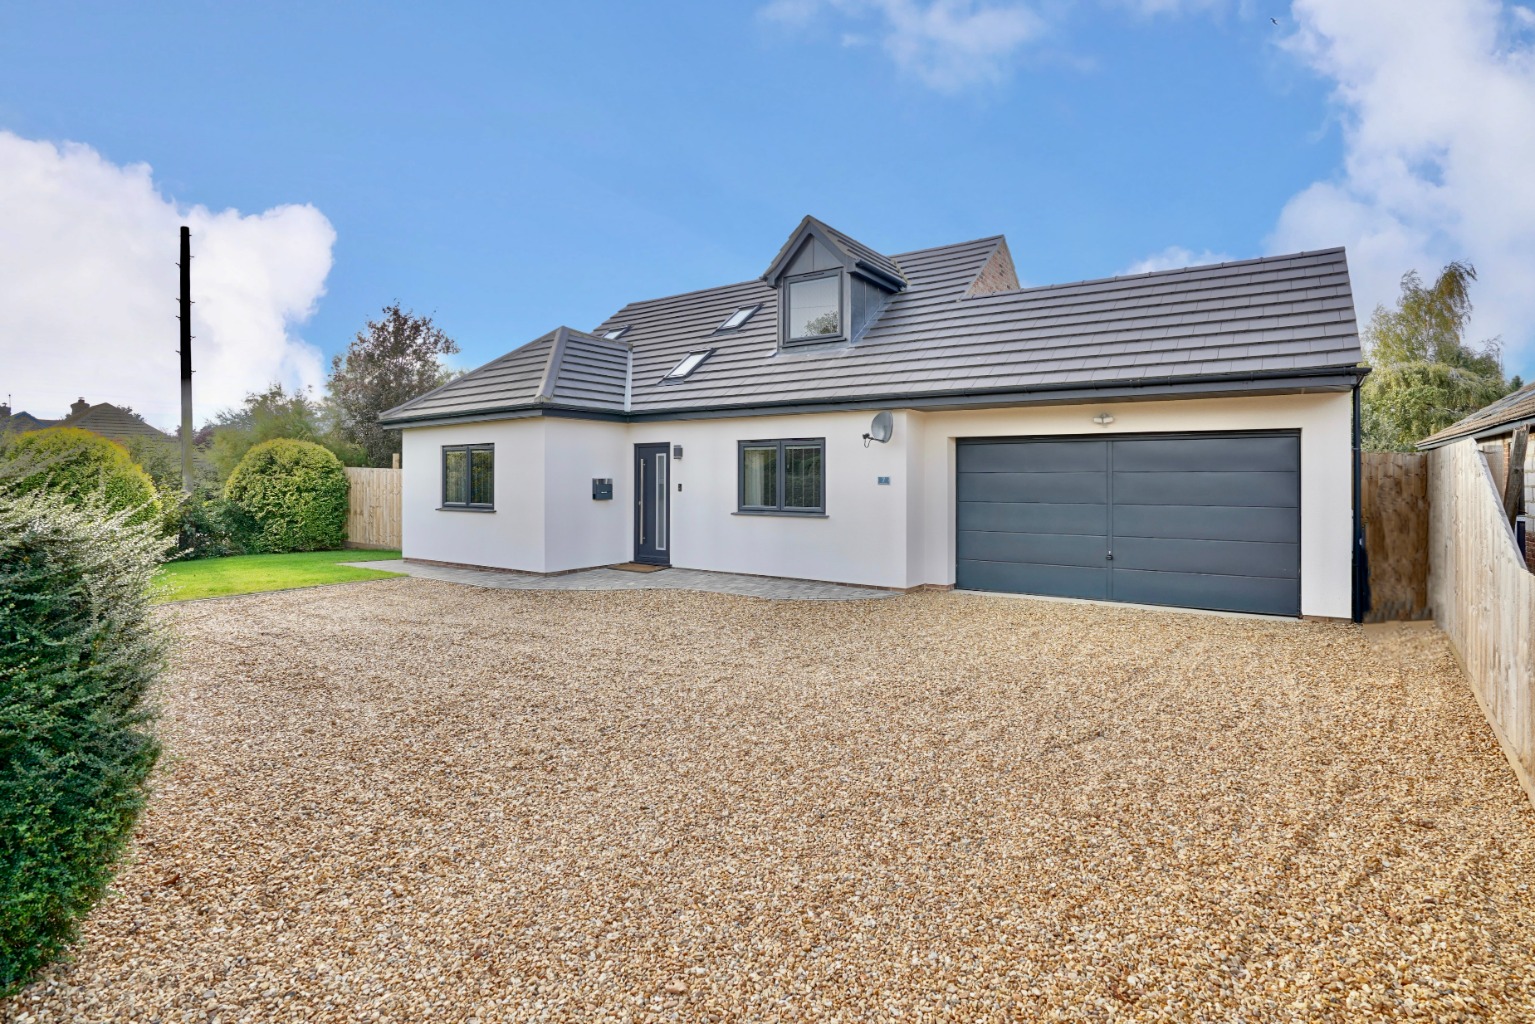 4 bed detached house for sale in Pound Road, Huntingdon - Property Image 1